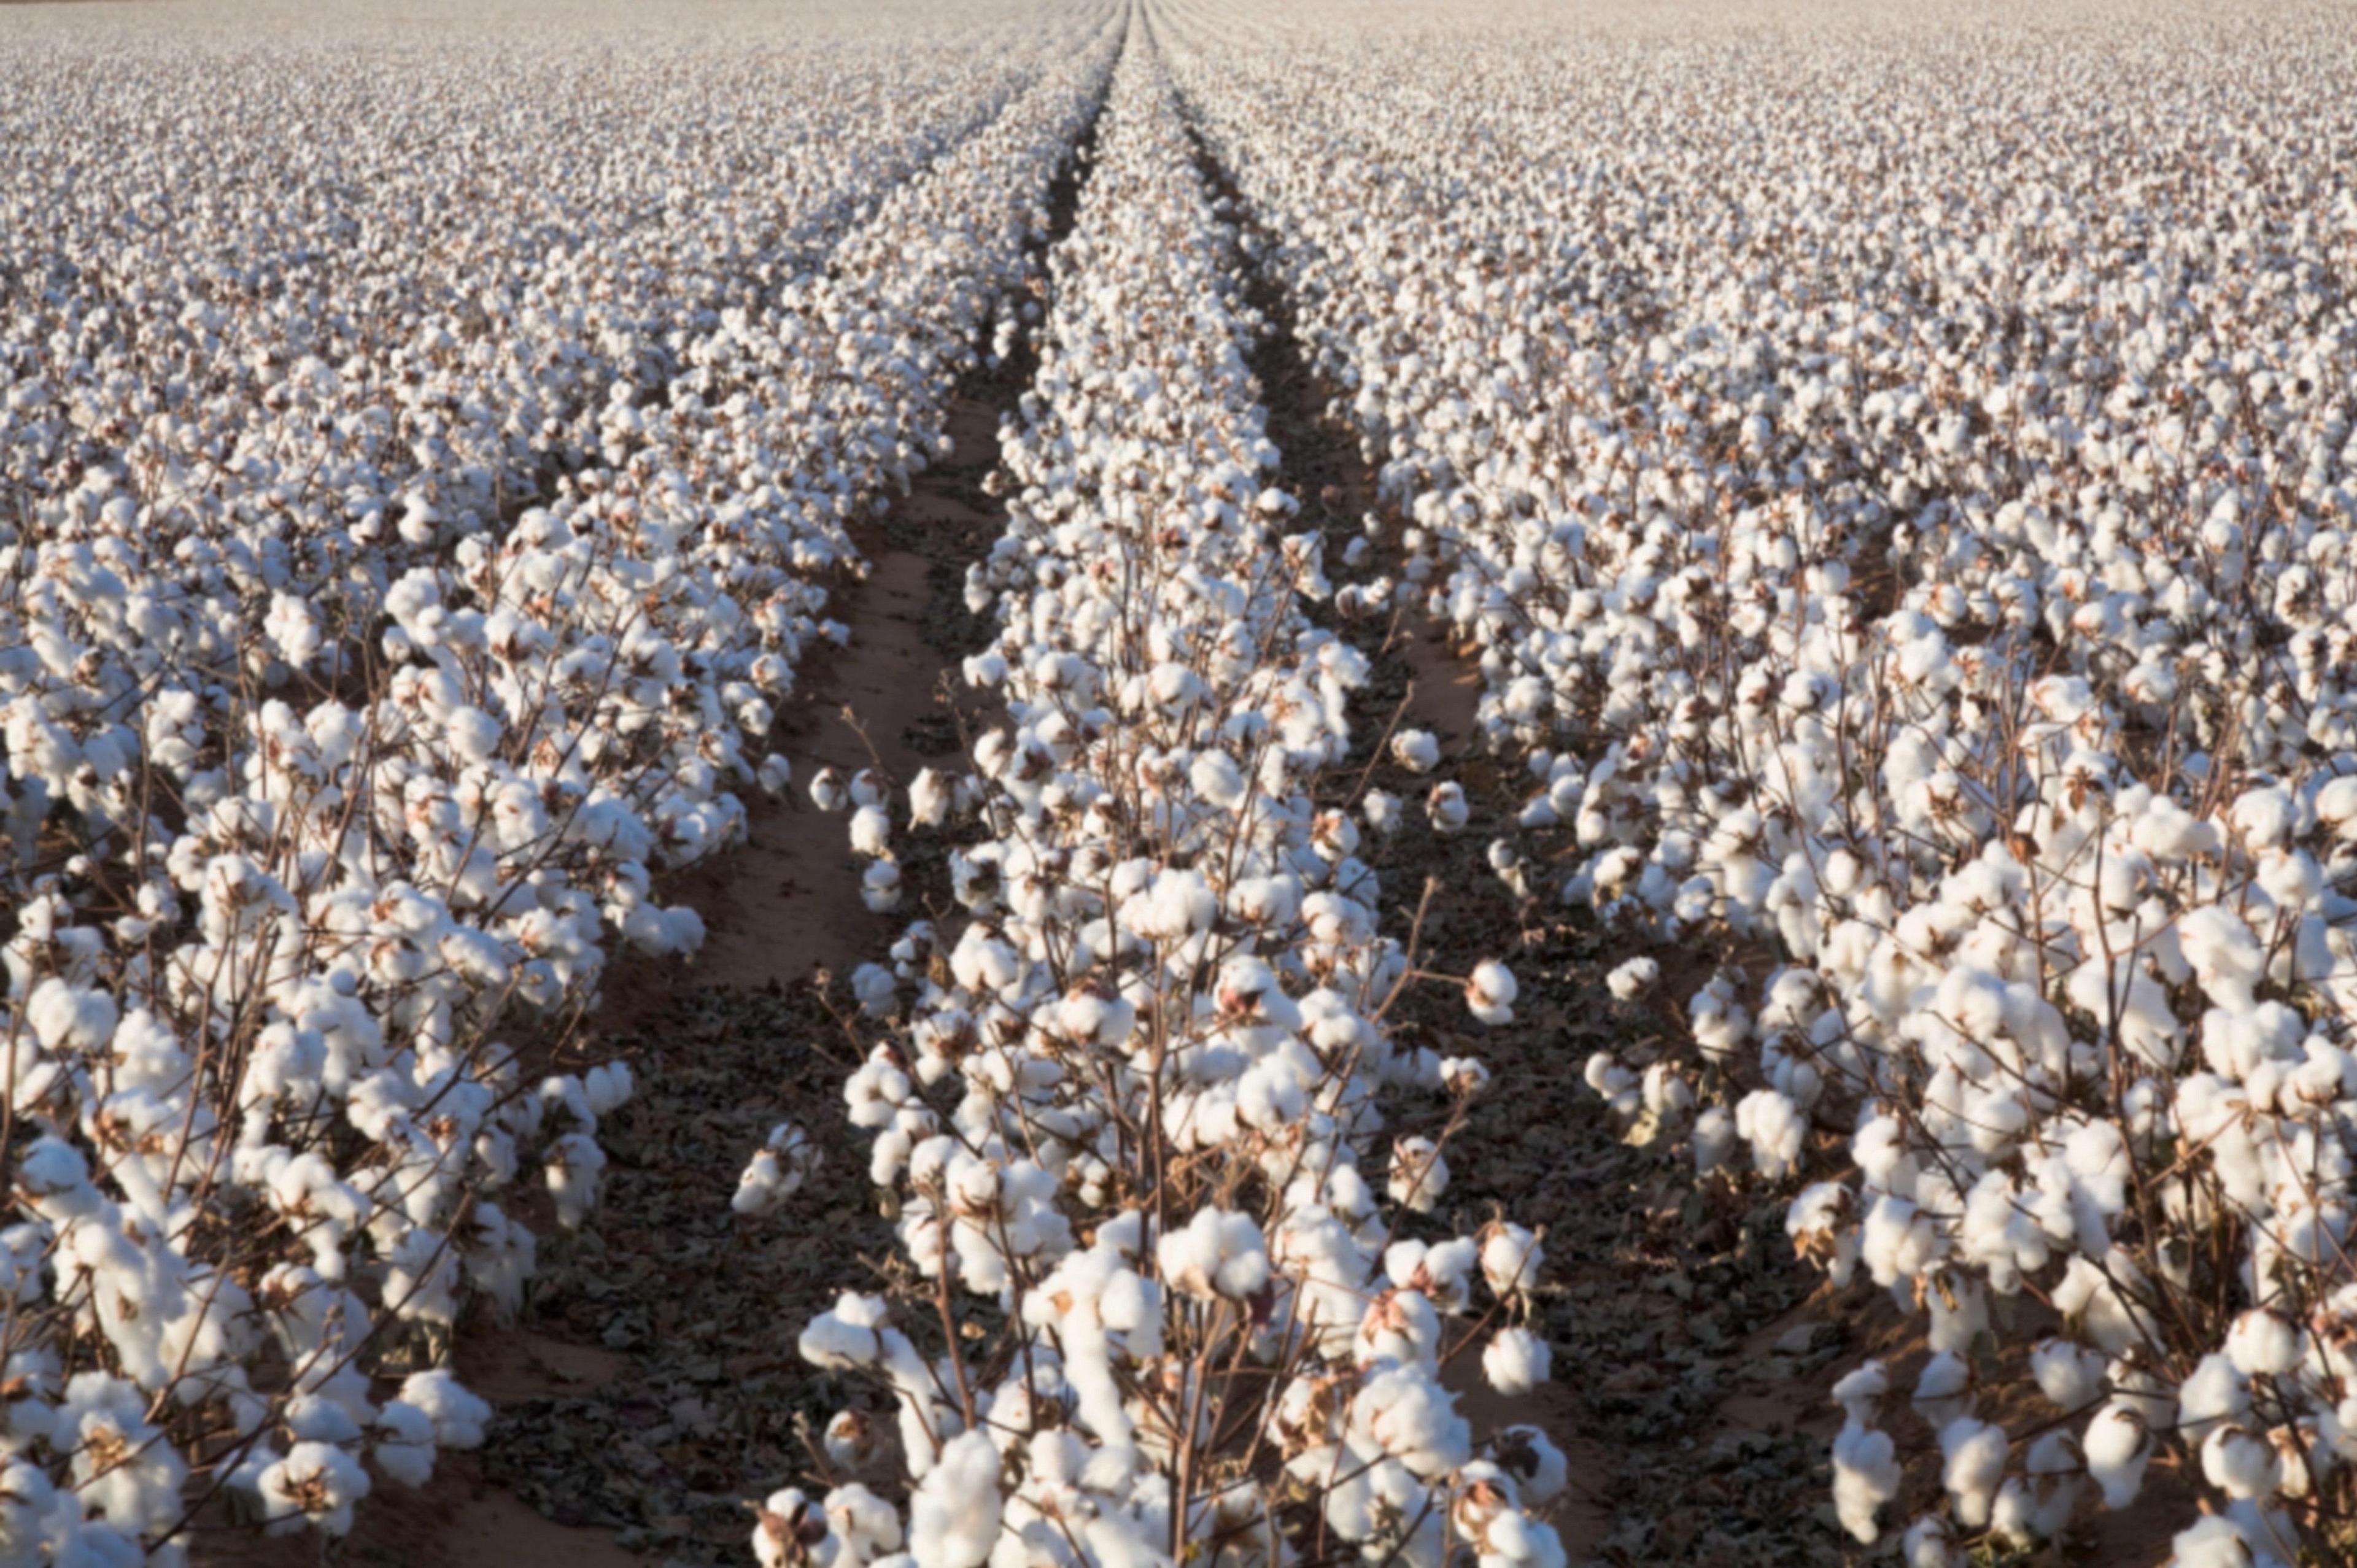 Imported cotton seeds allowed to be planted for the first time